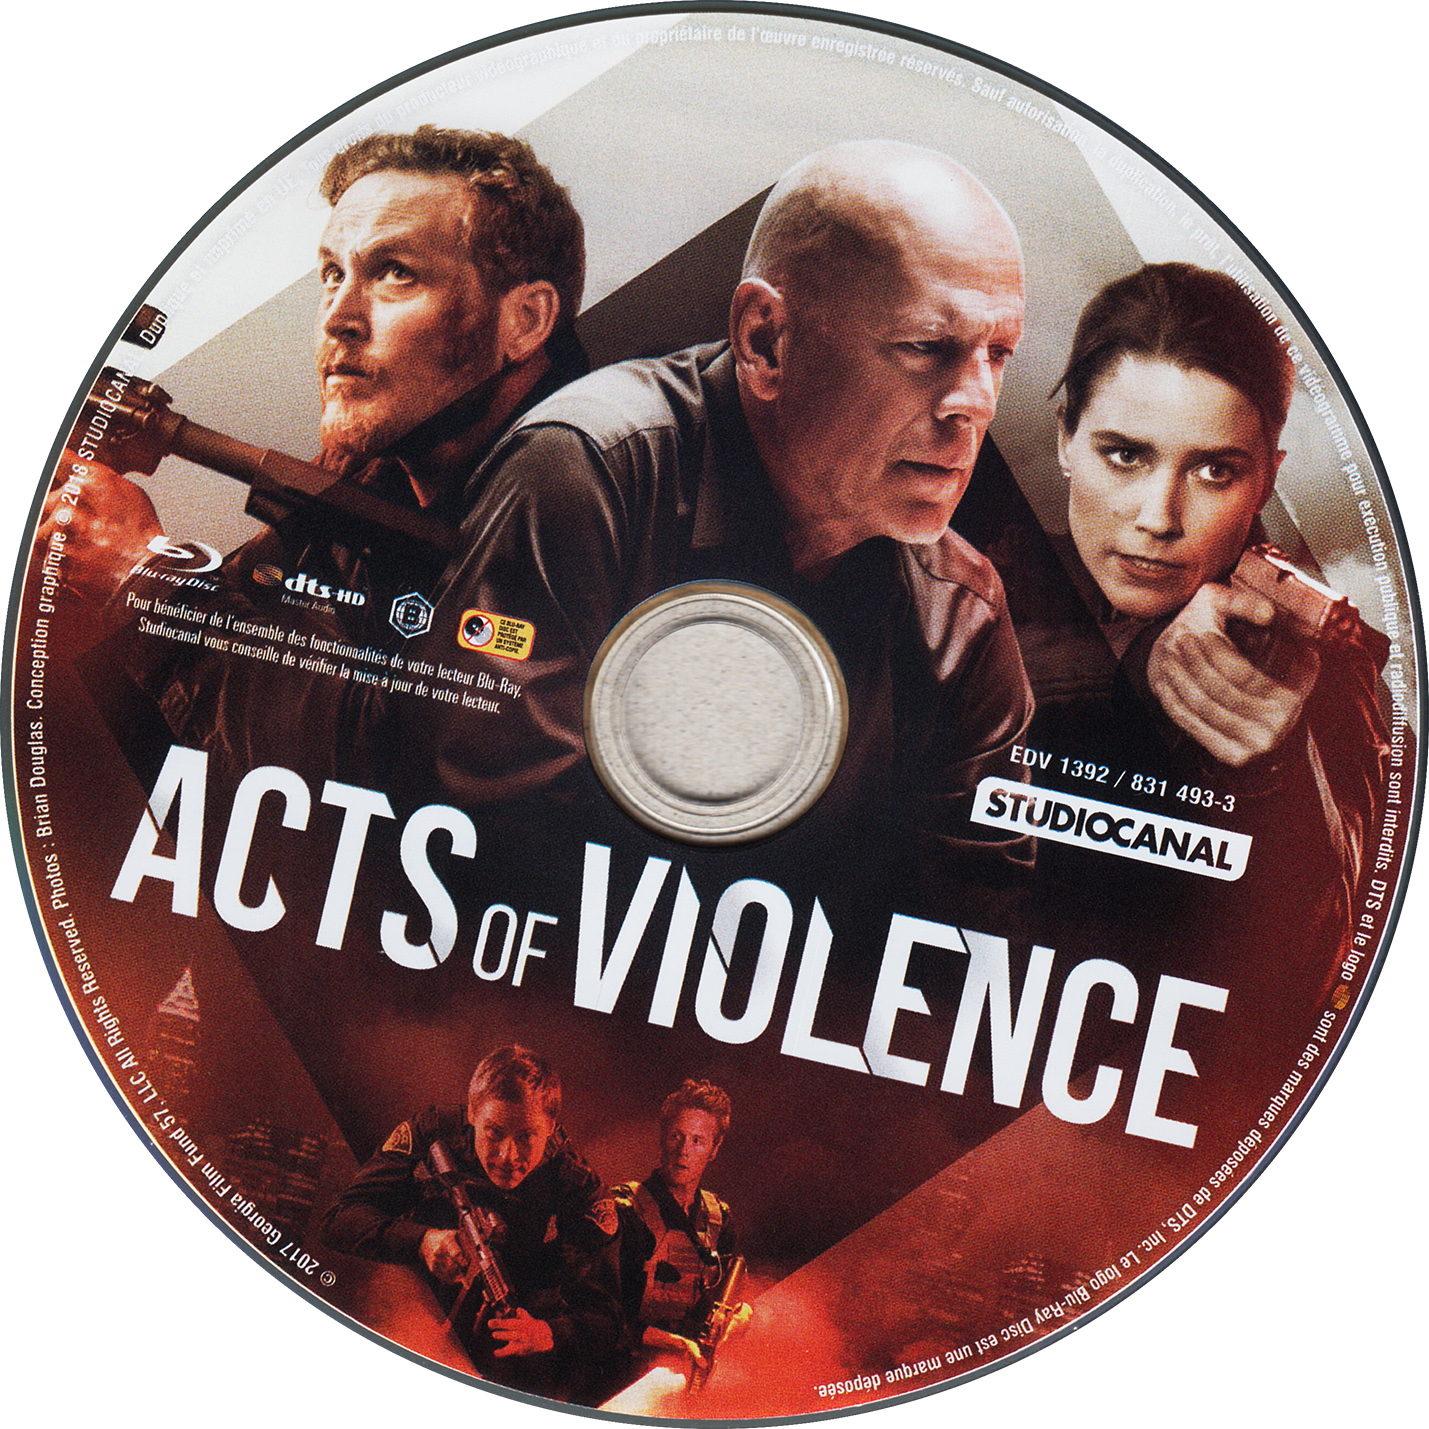 Acts of violence (BLU-RAY)